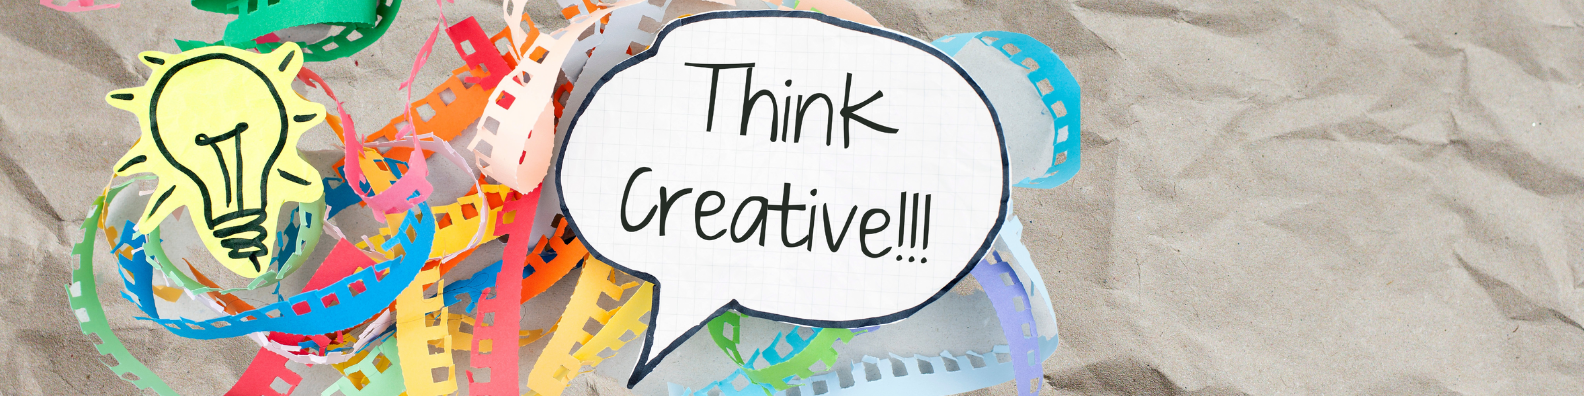 Time to Up Your Marketing Strategy: 5 Ways to Be Creative